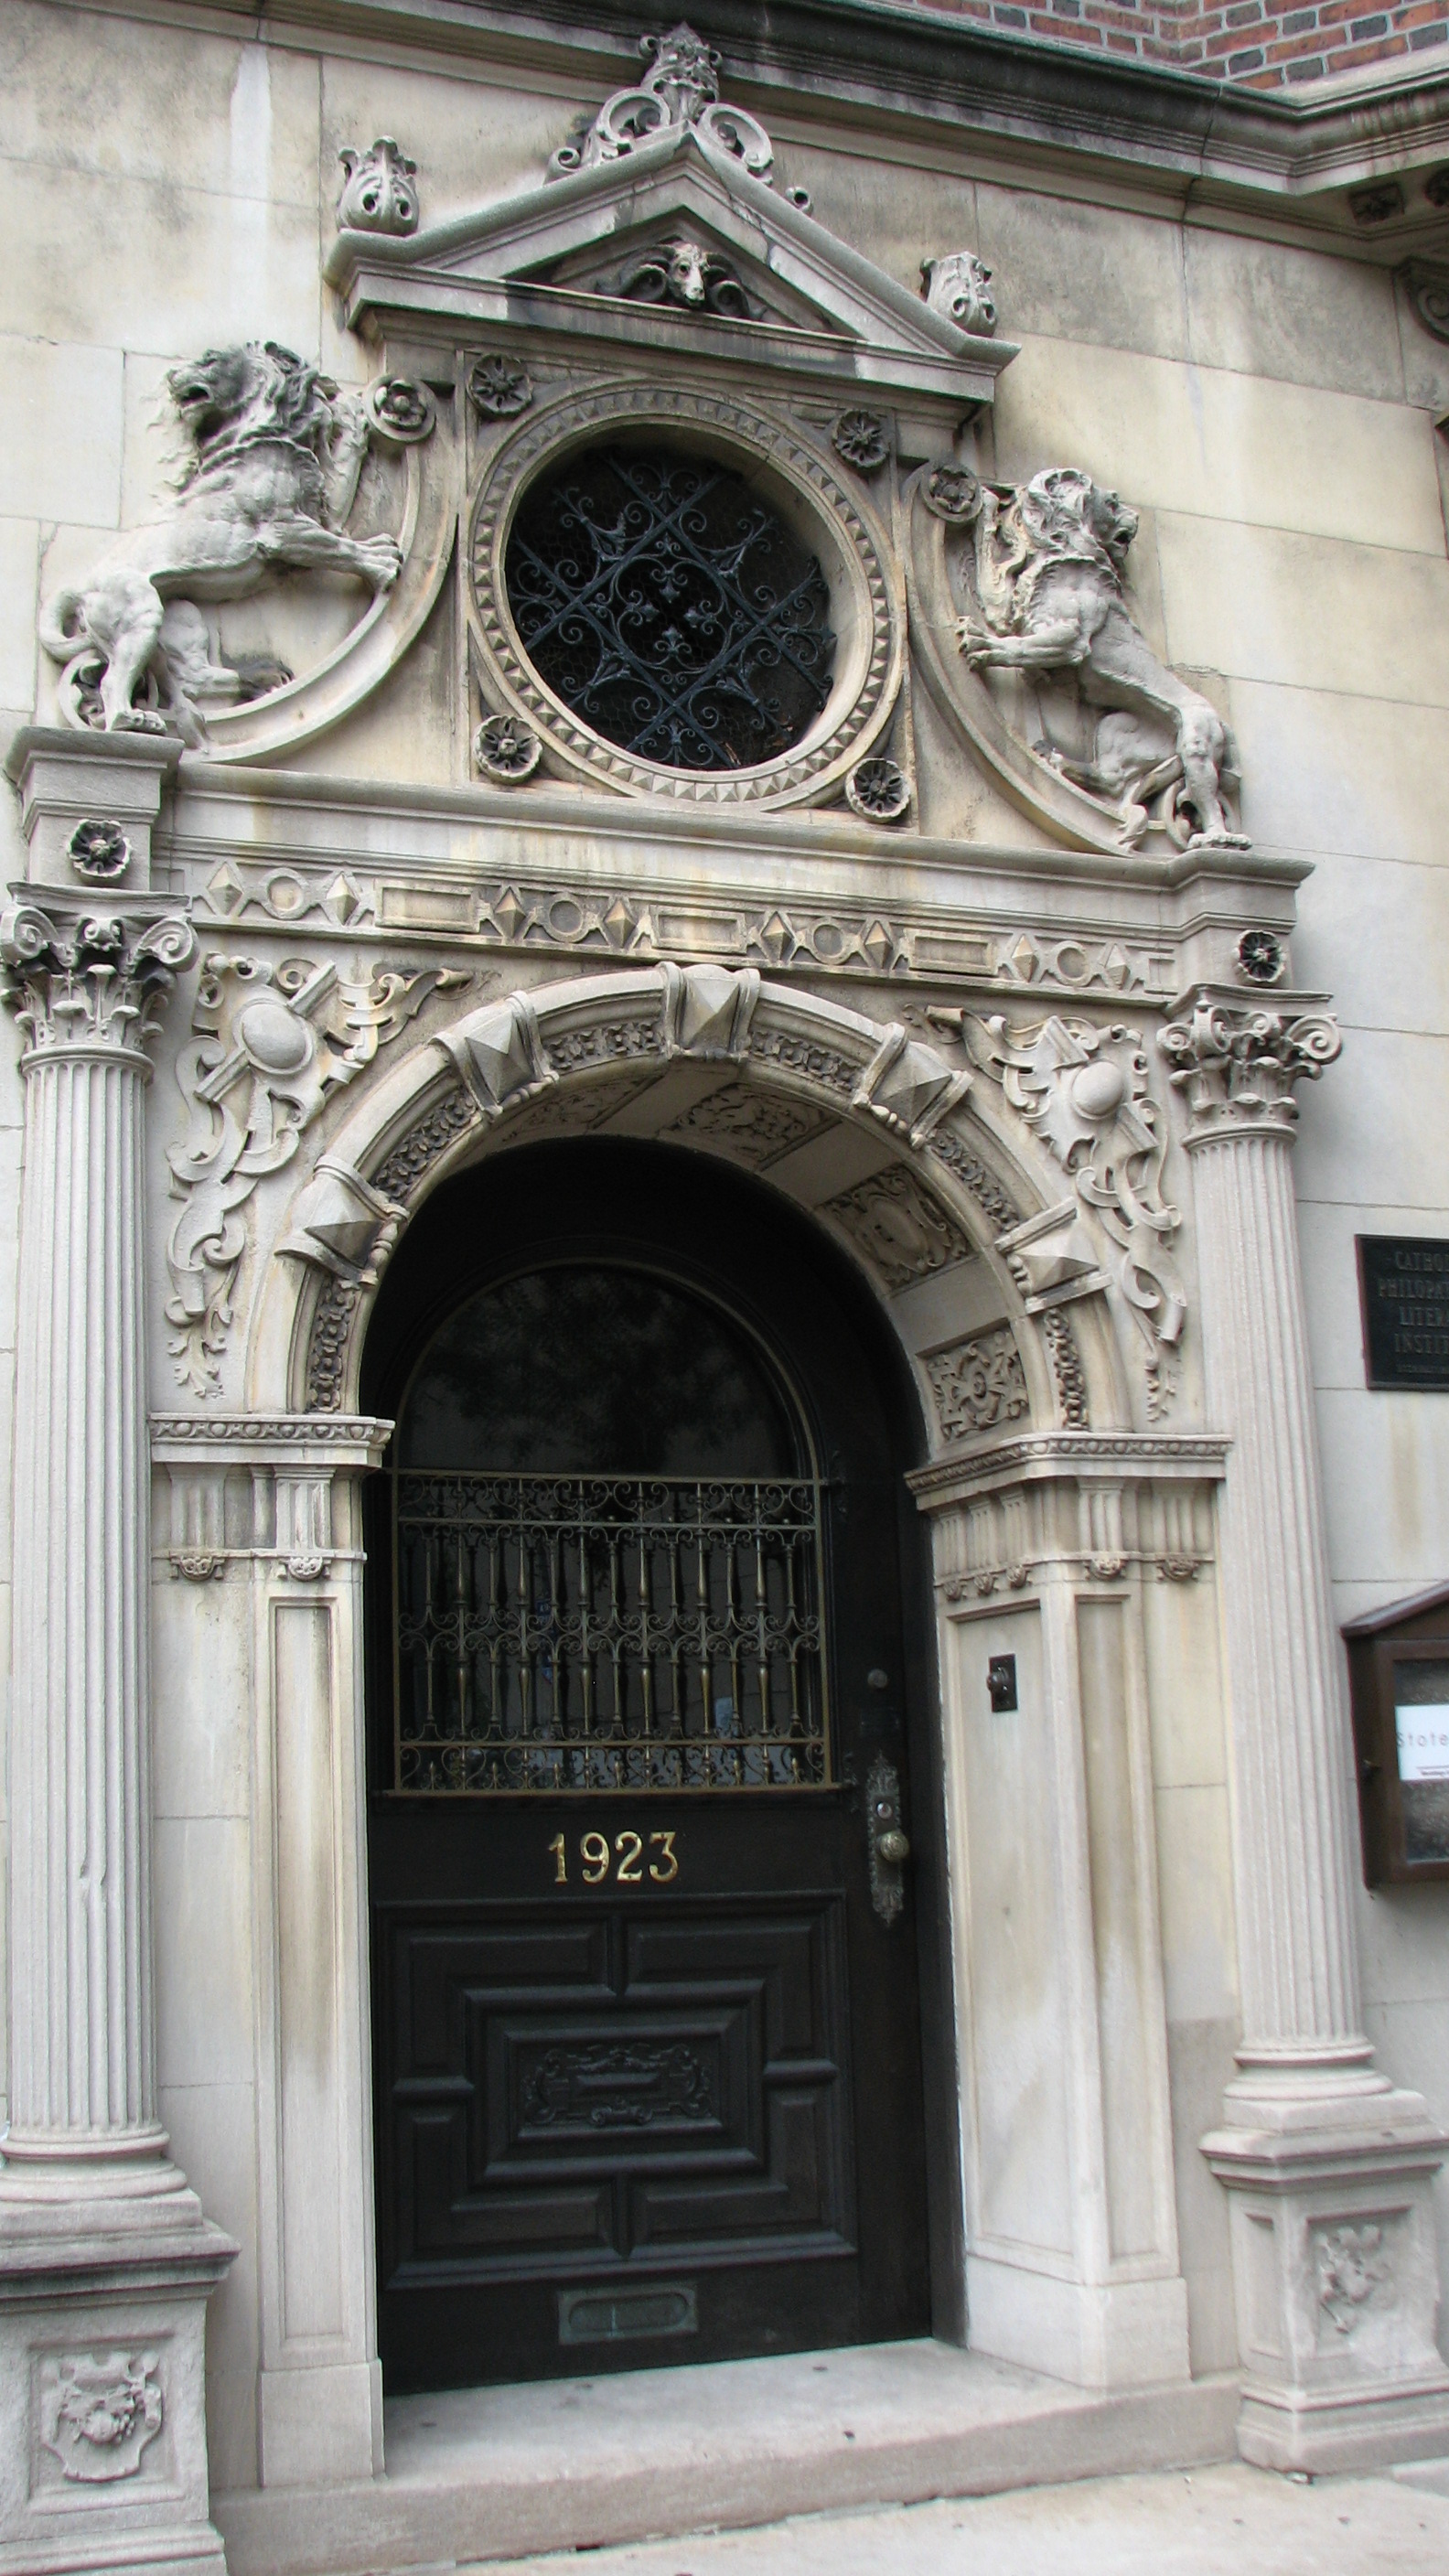 The entrance to 1923 Walnut St.